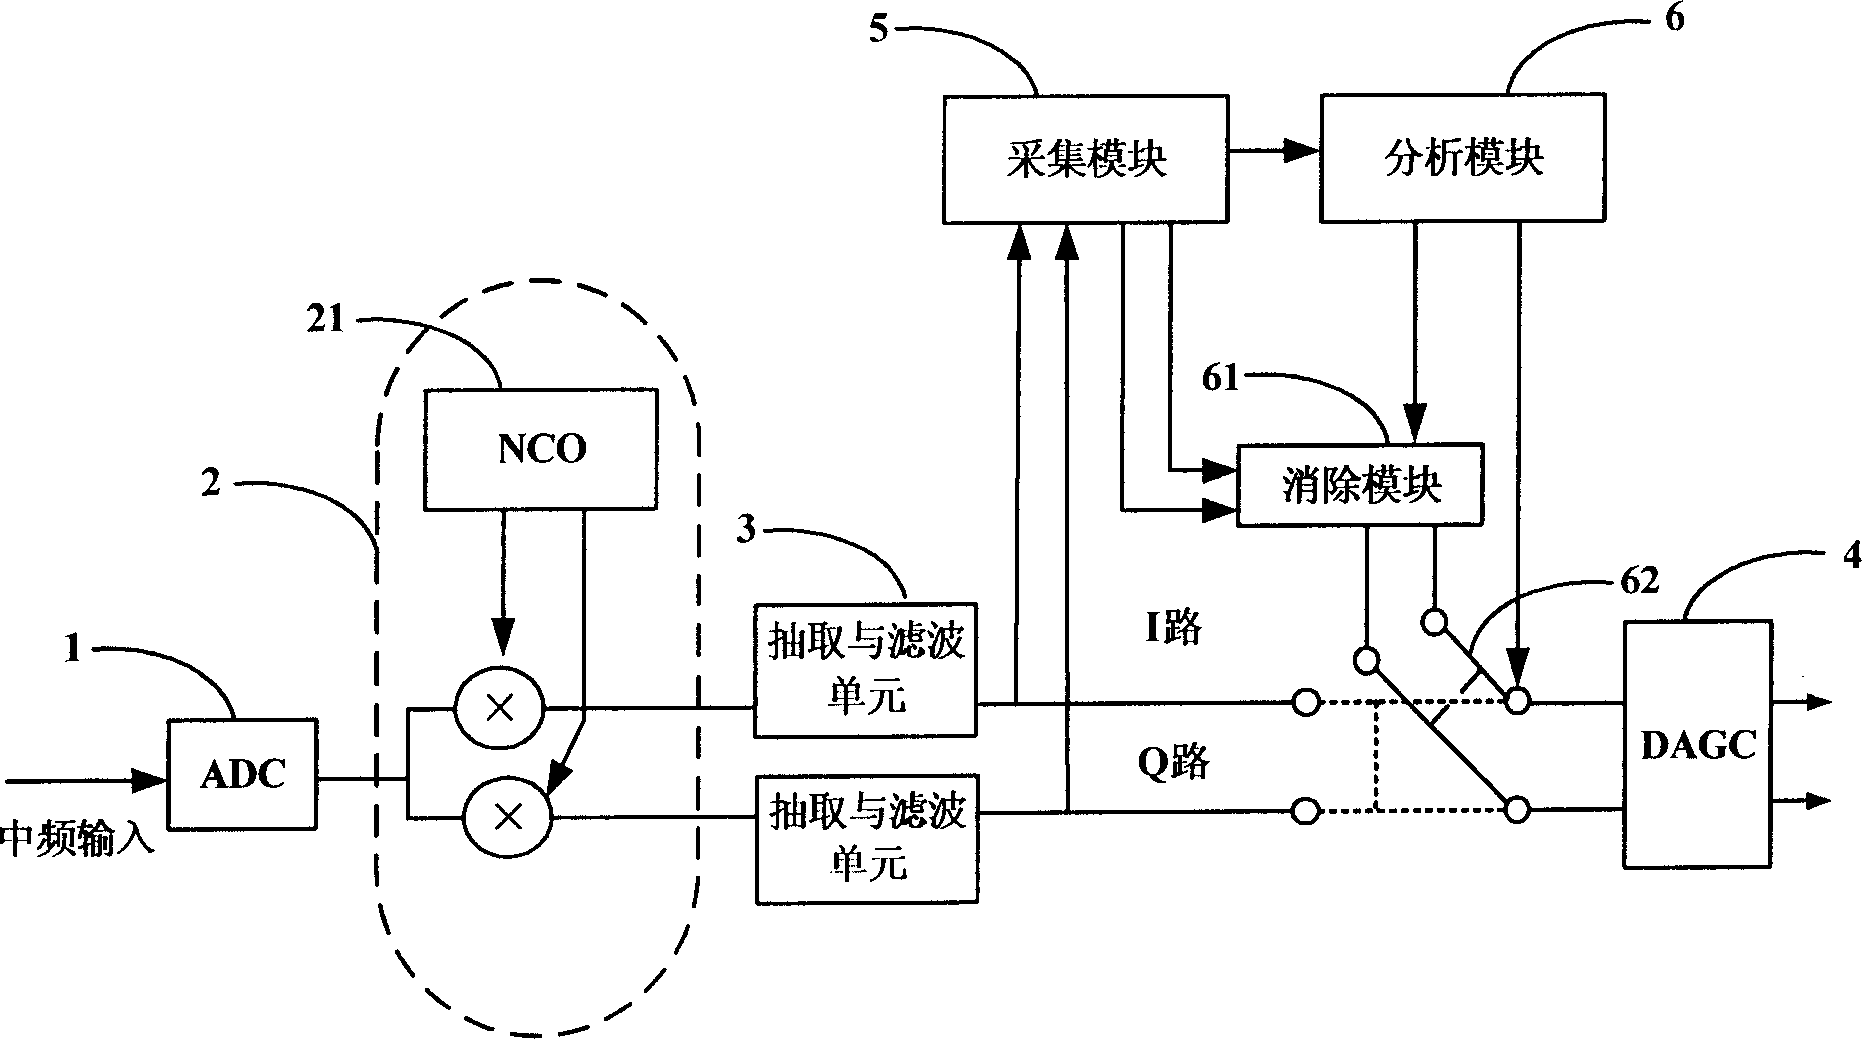 Interference detecting processing system and method